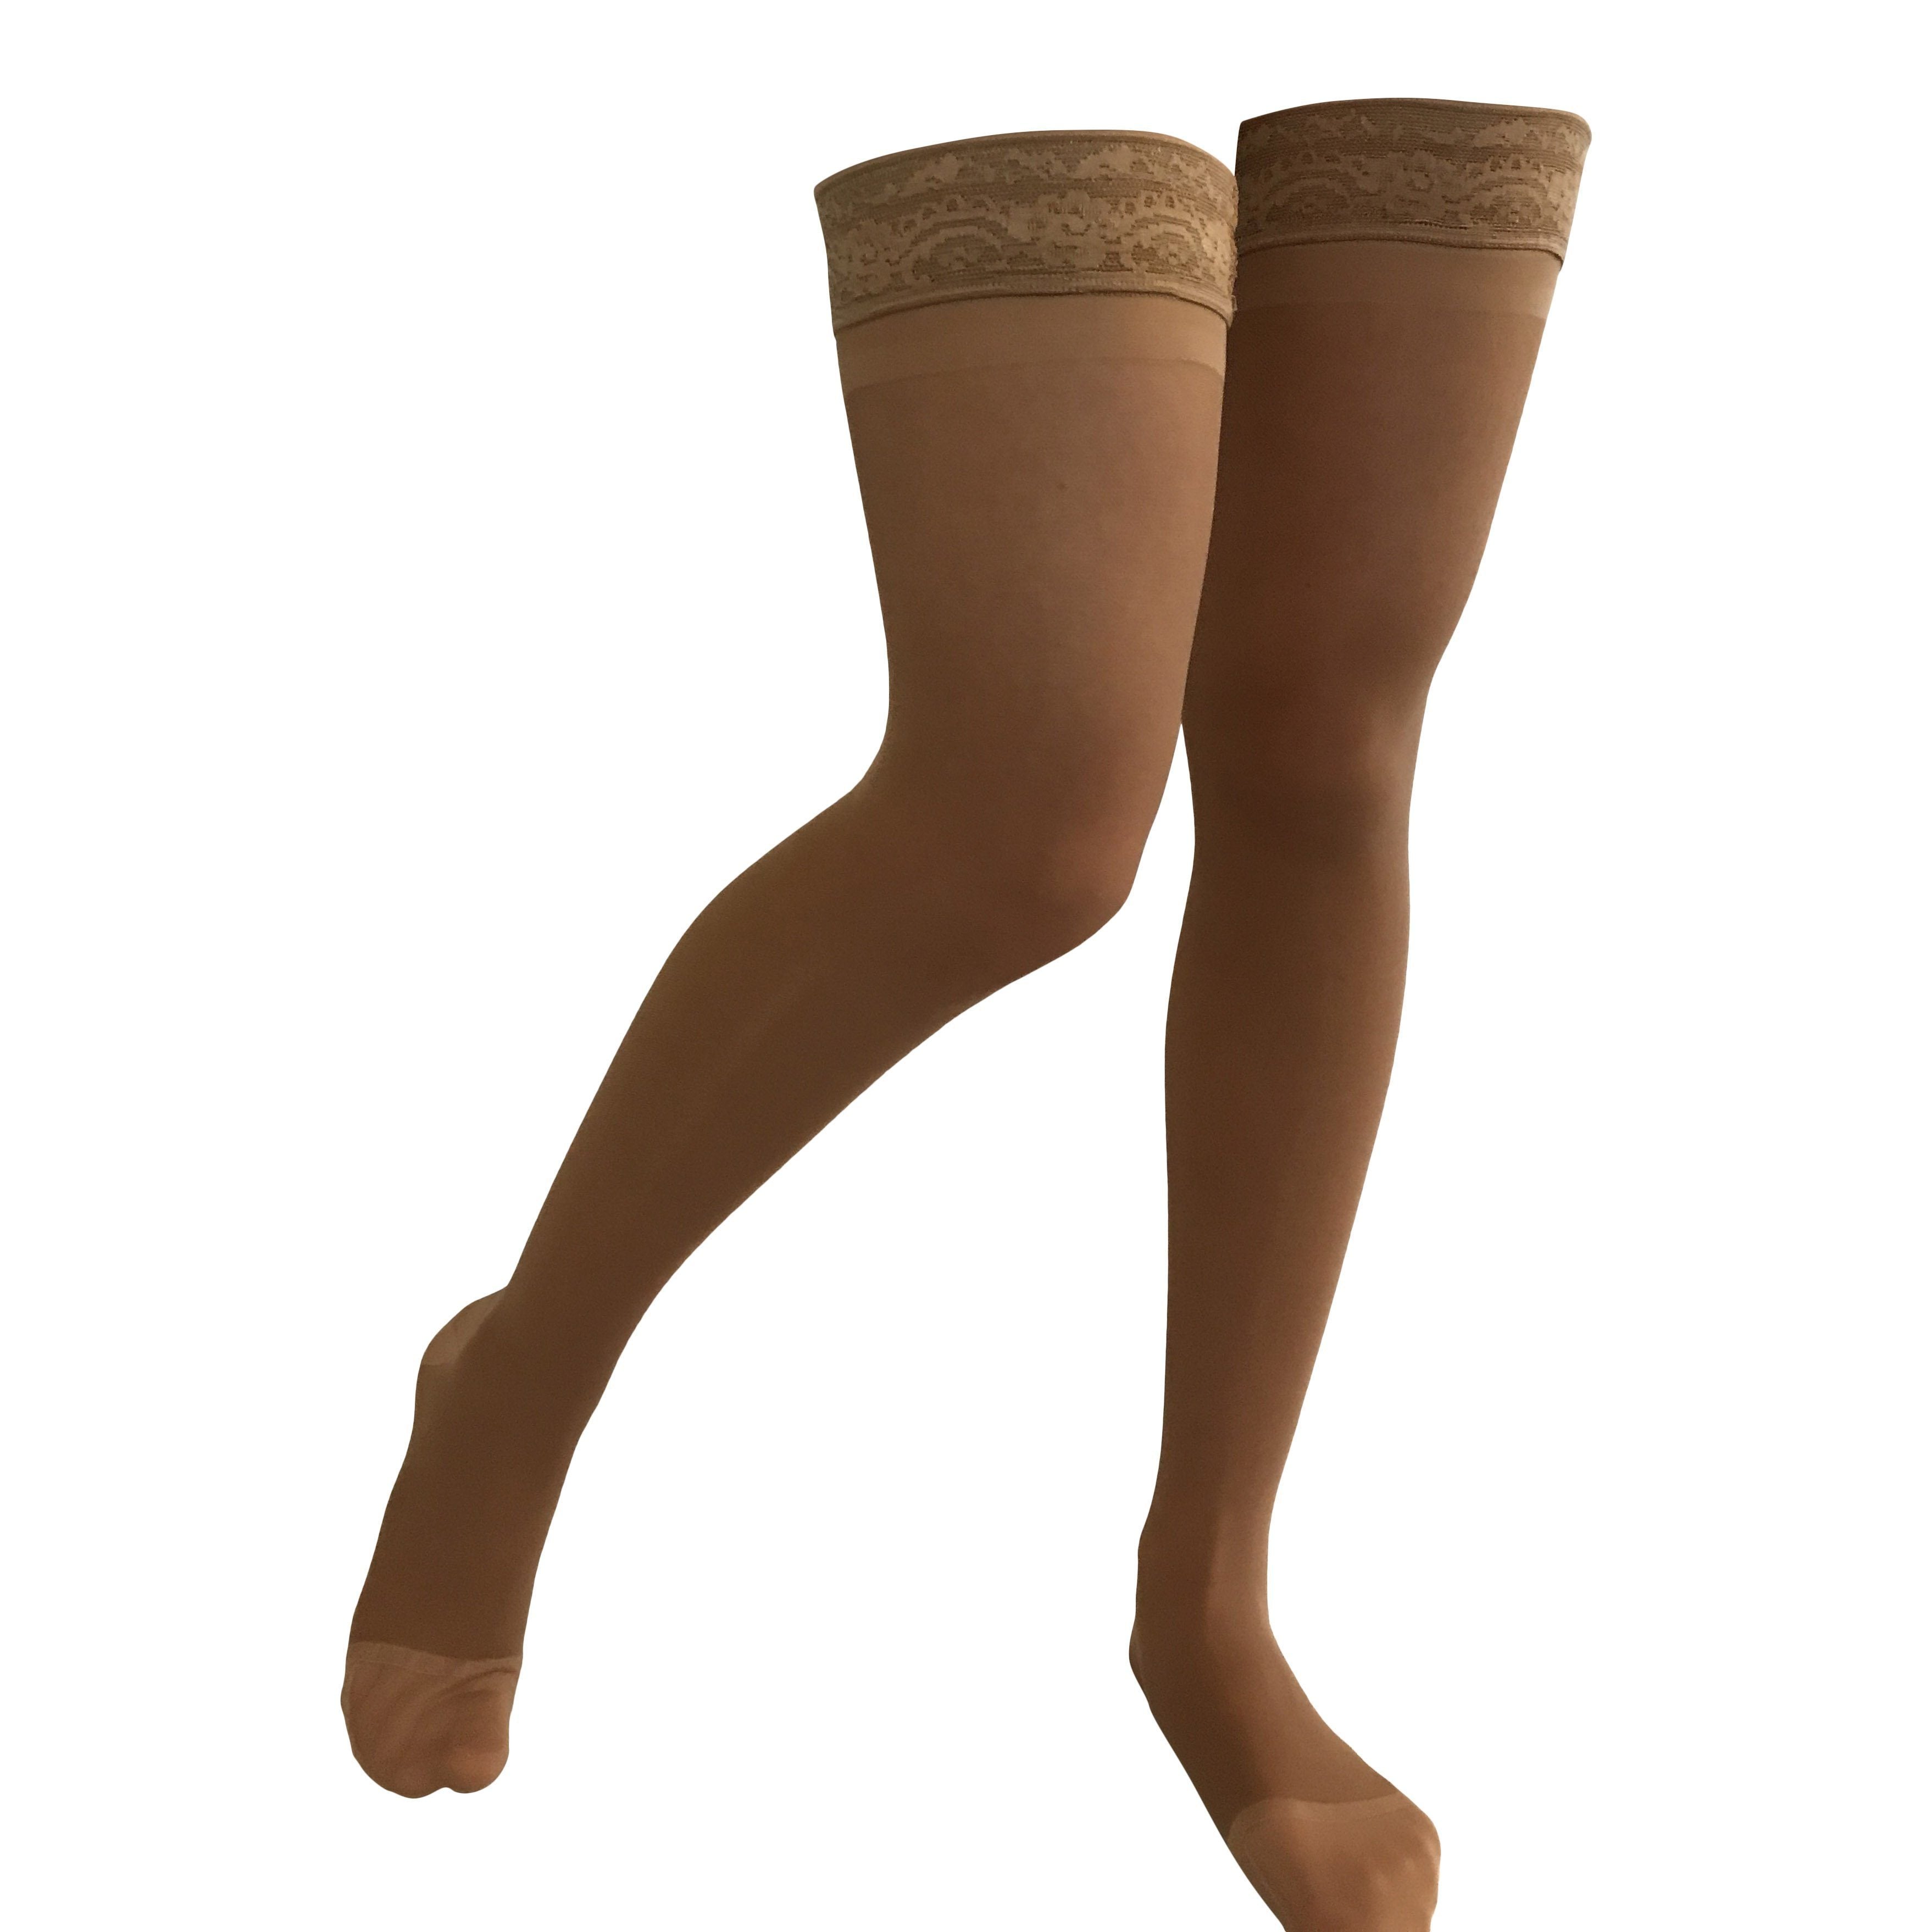 TruSheer Extra Firm Compression Thigh High Stockings, 30-40mm Hg